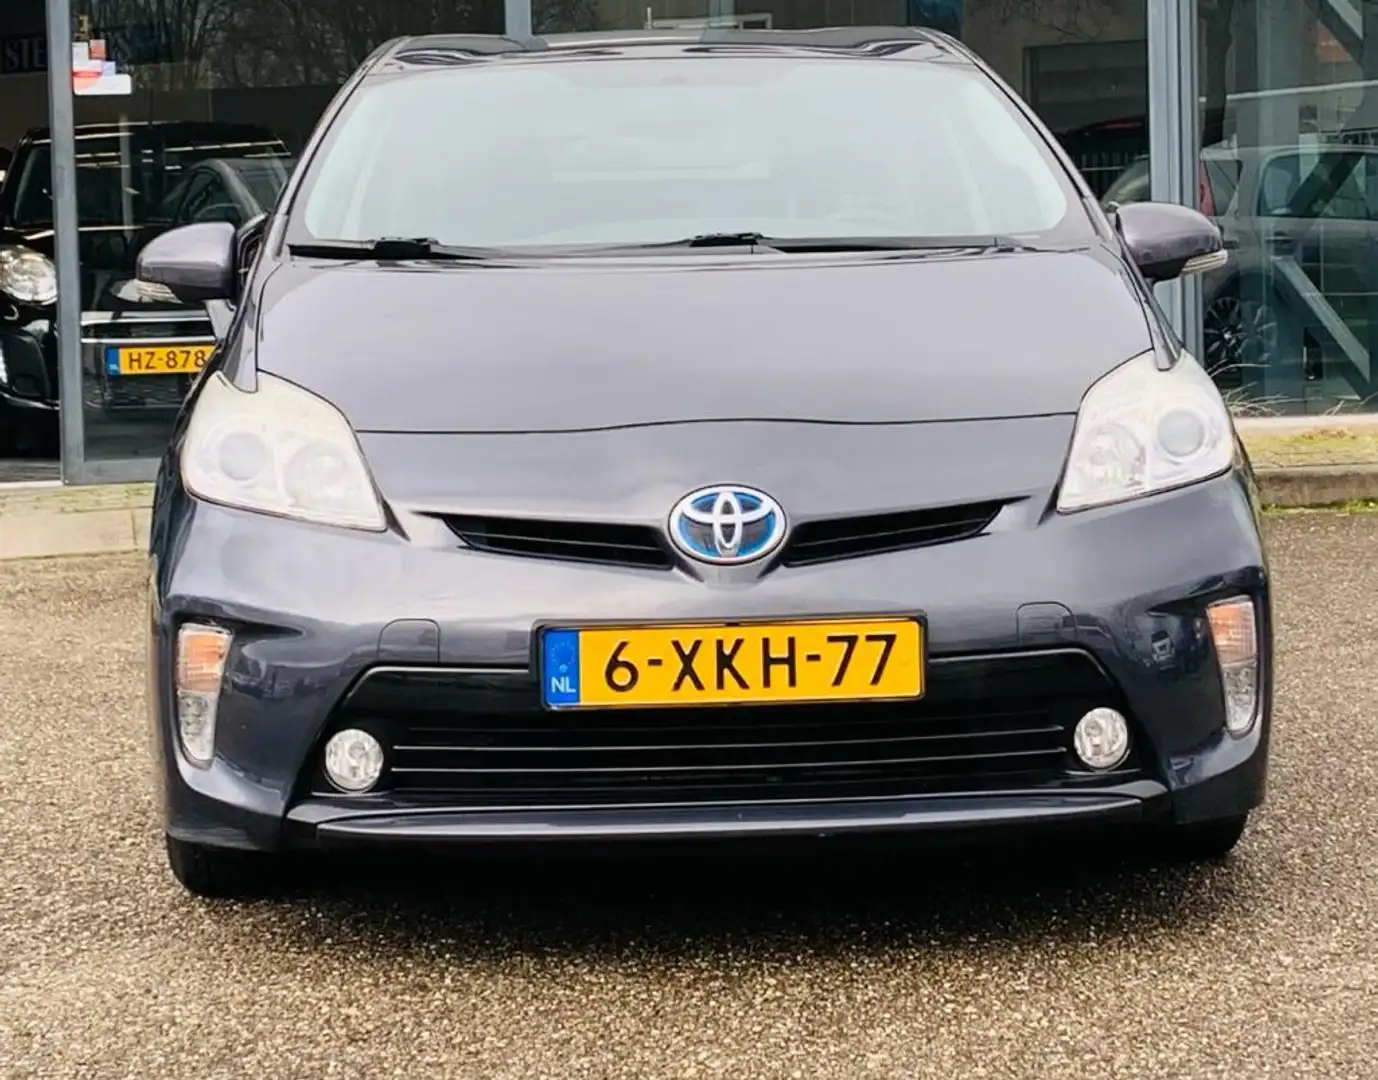 Toyota Prius 1.8 Comfort Top 5 edition, KM 77300 NAP, Cruise Co Gris - 2